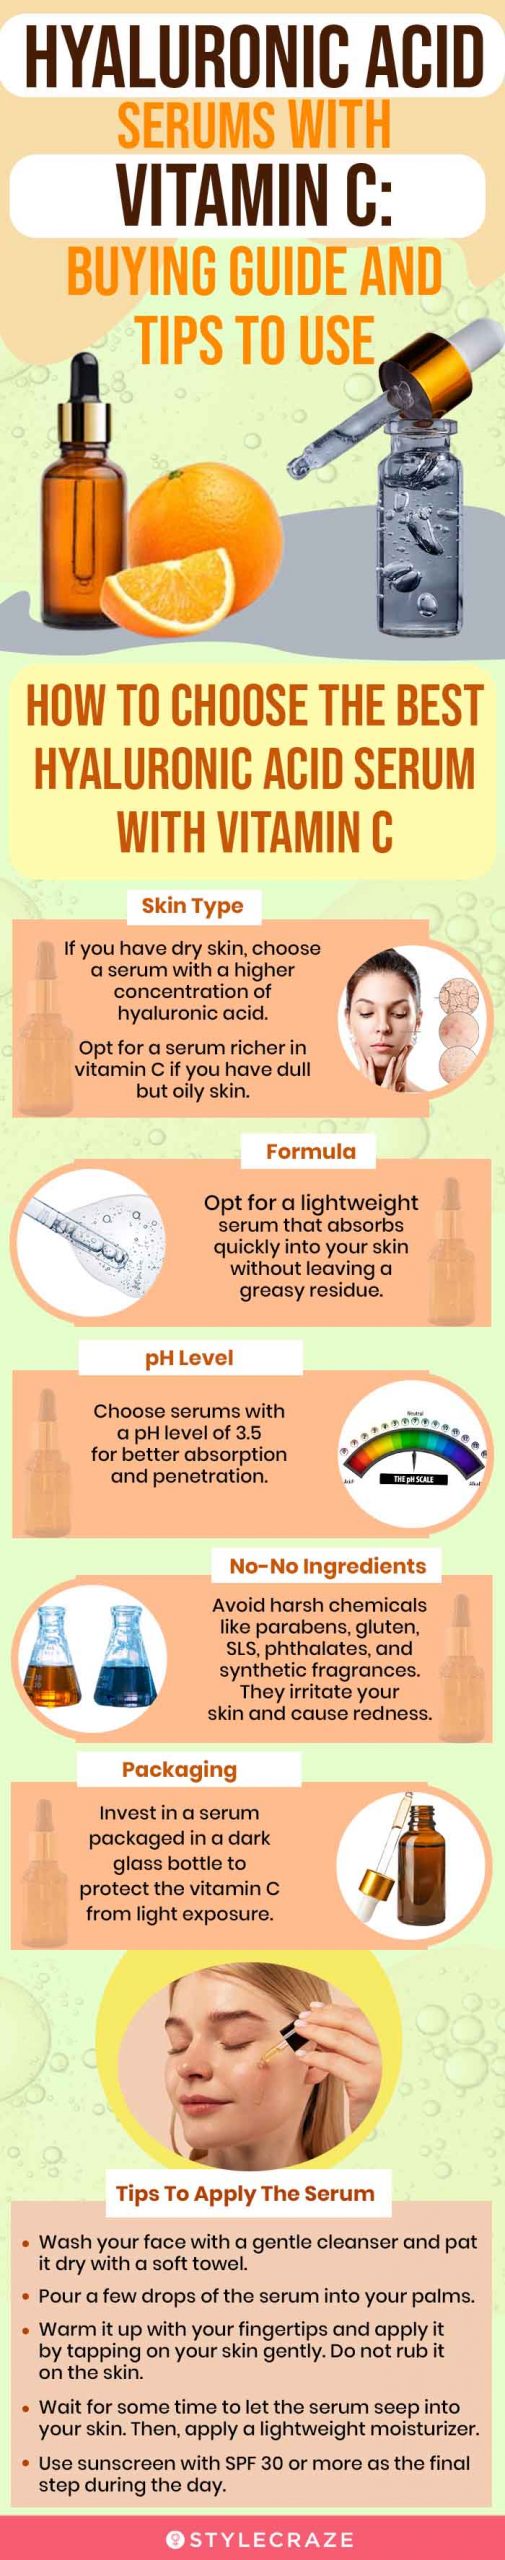 Hyaluronic Acid Serums With Vitamin C: Buying Guide And Tips To Use [infographic]